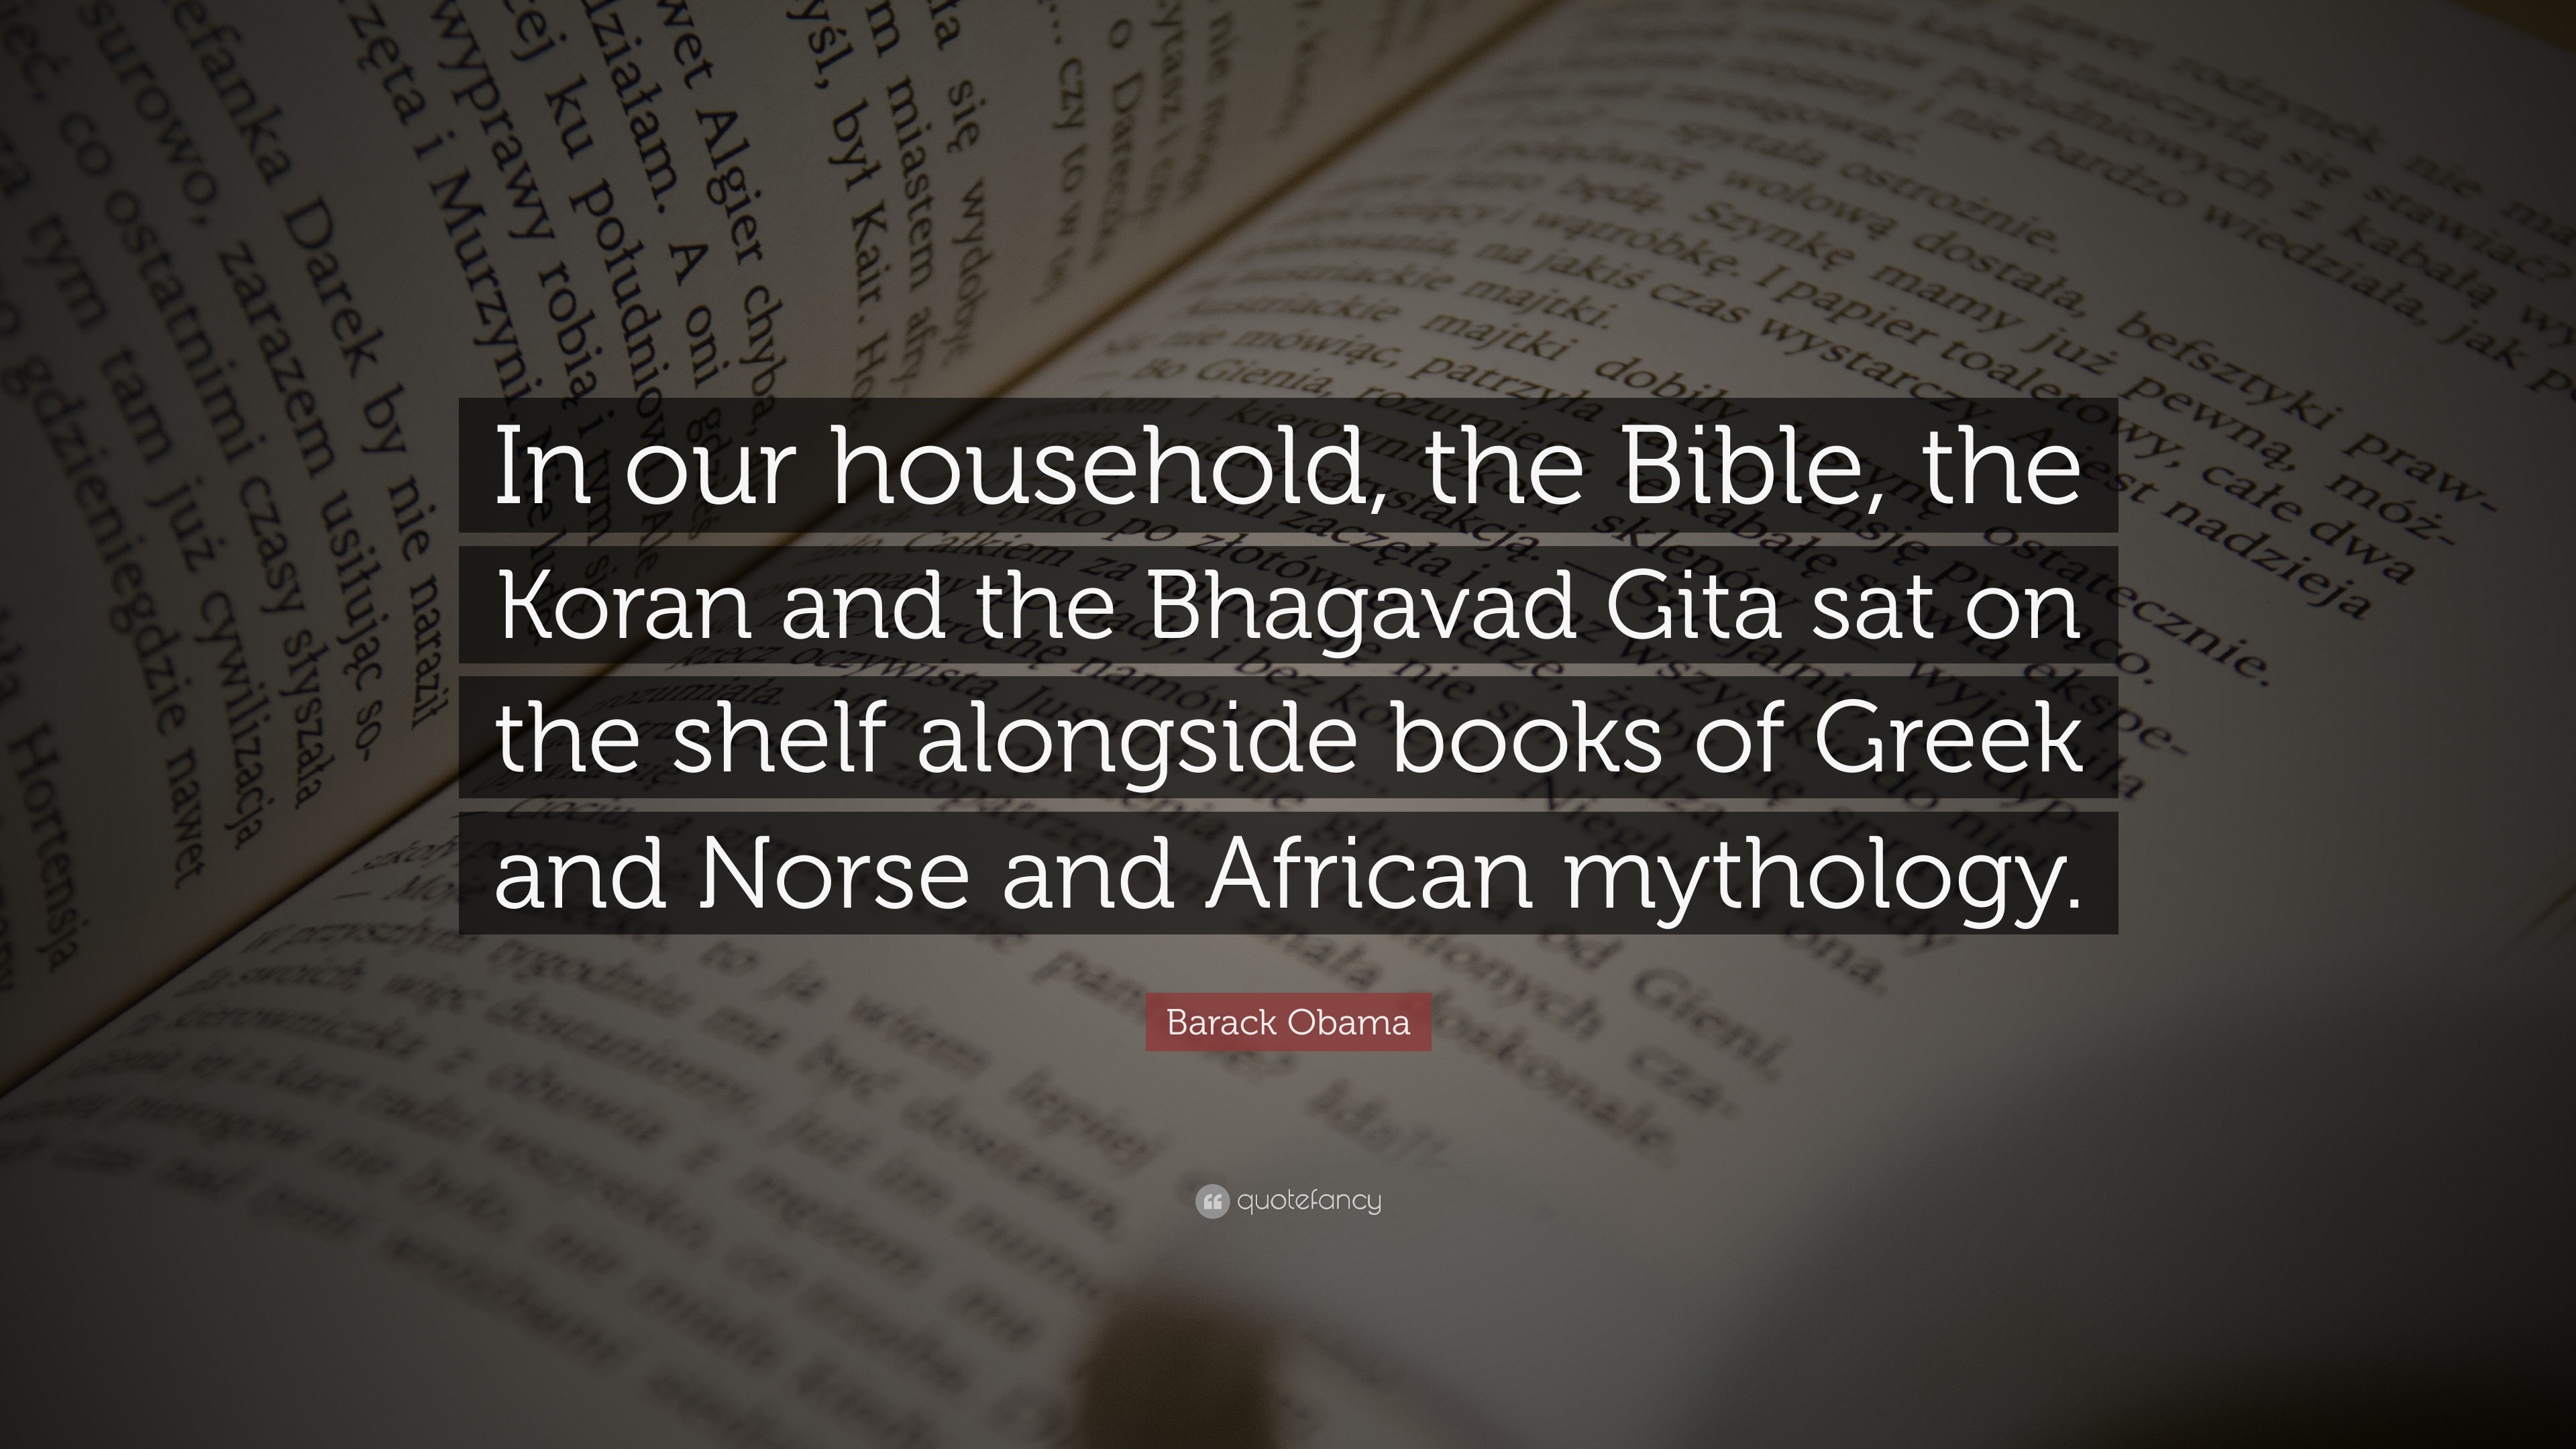 3840x2160 Barack Obama Quote: “In our household, the Bible, the Koran and the